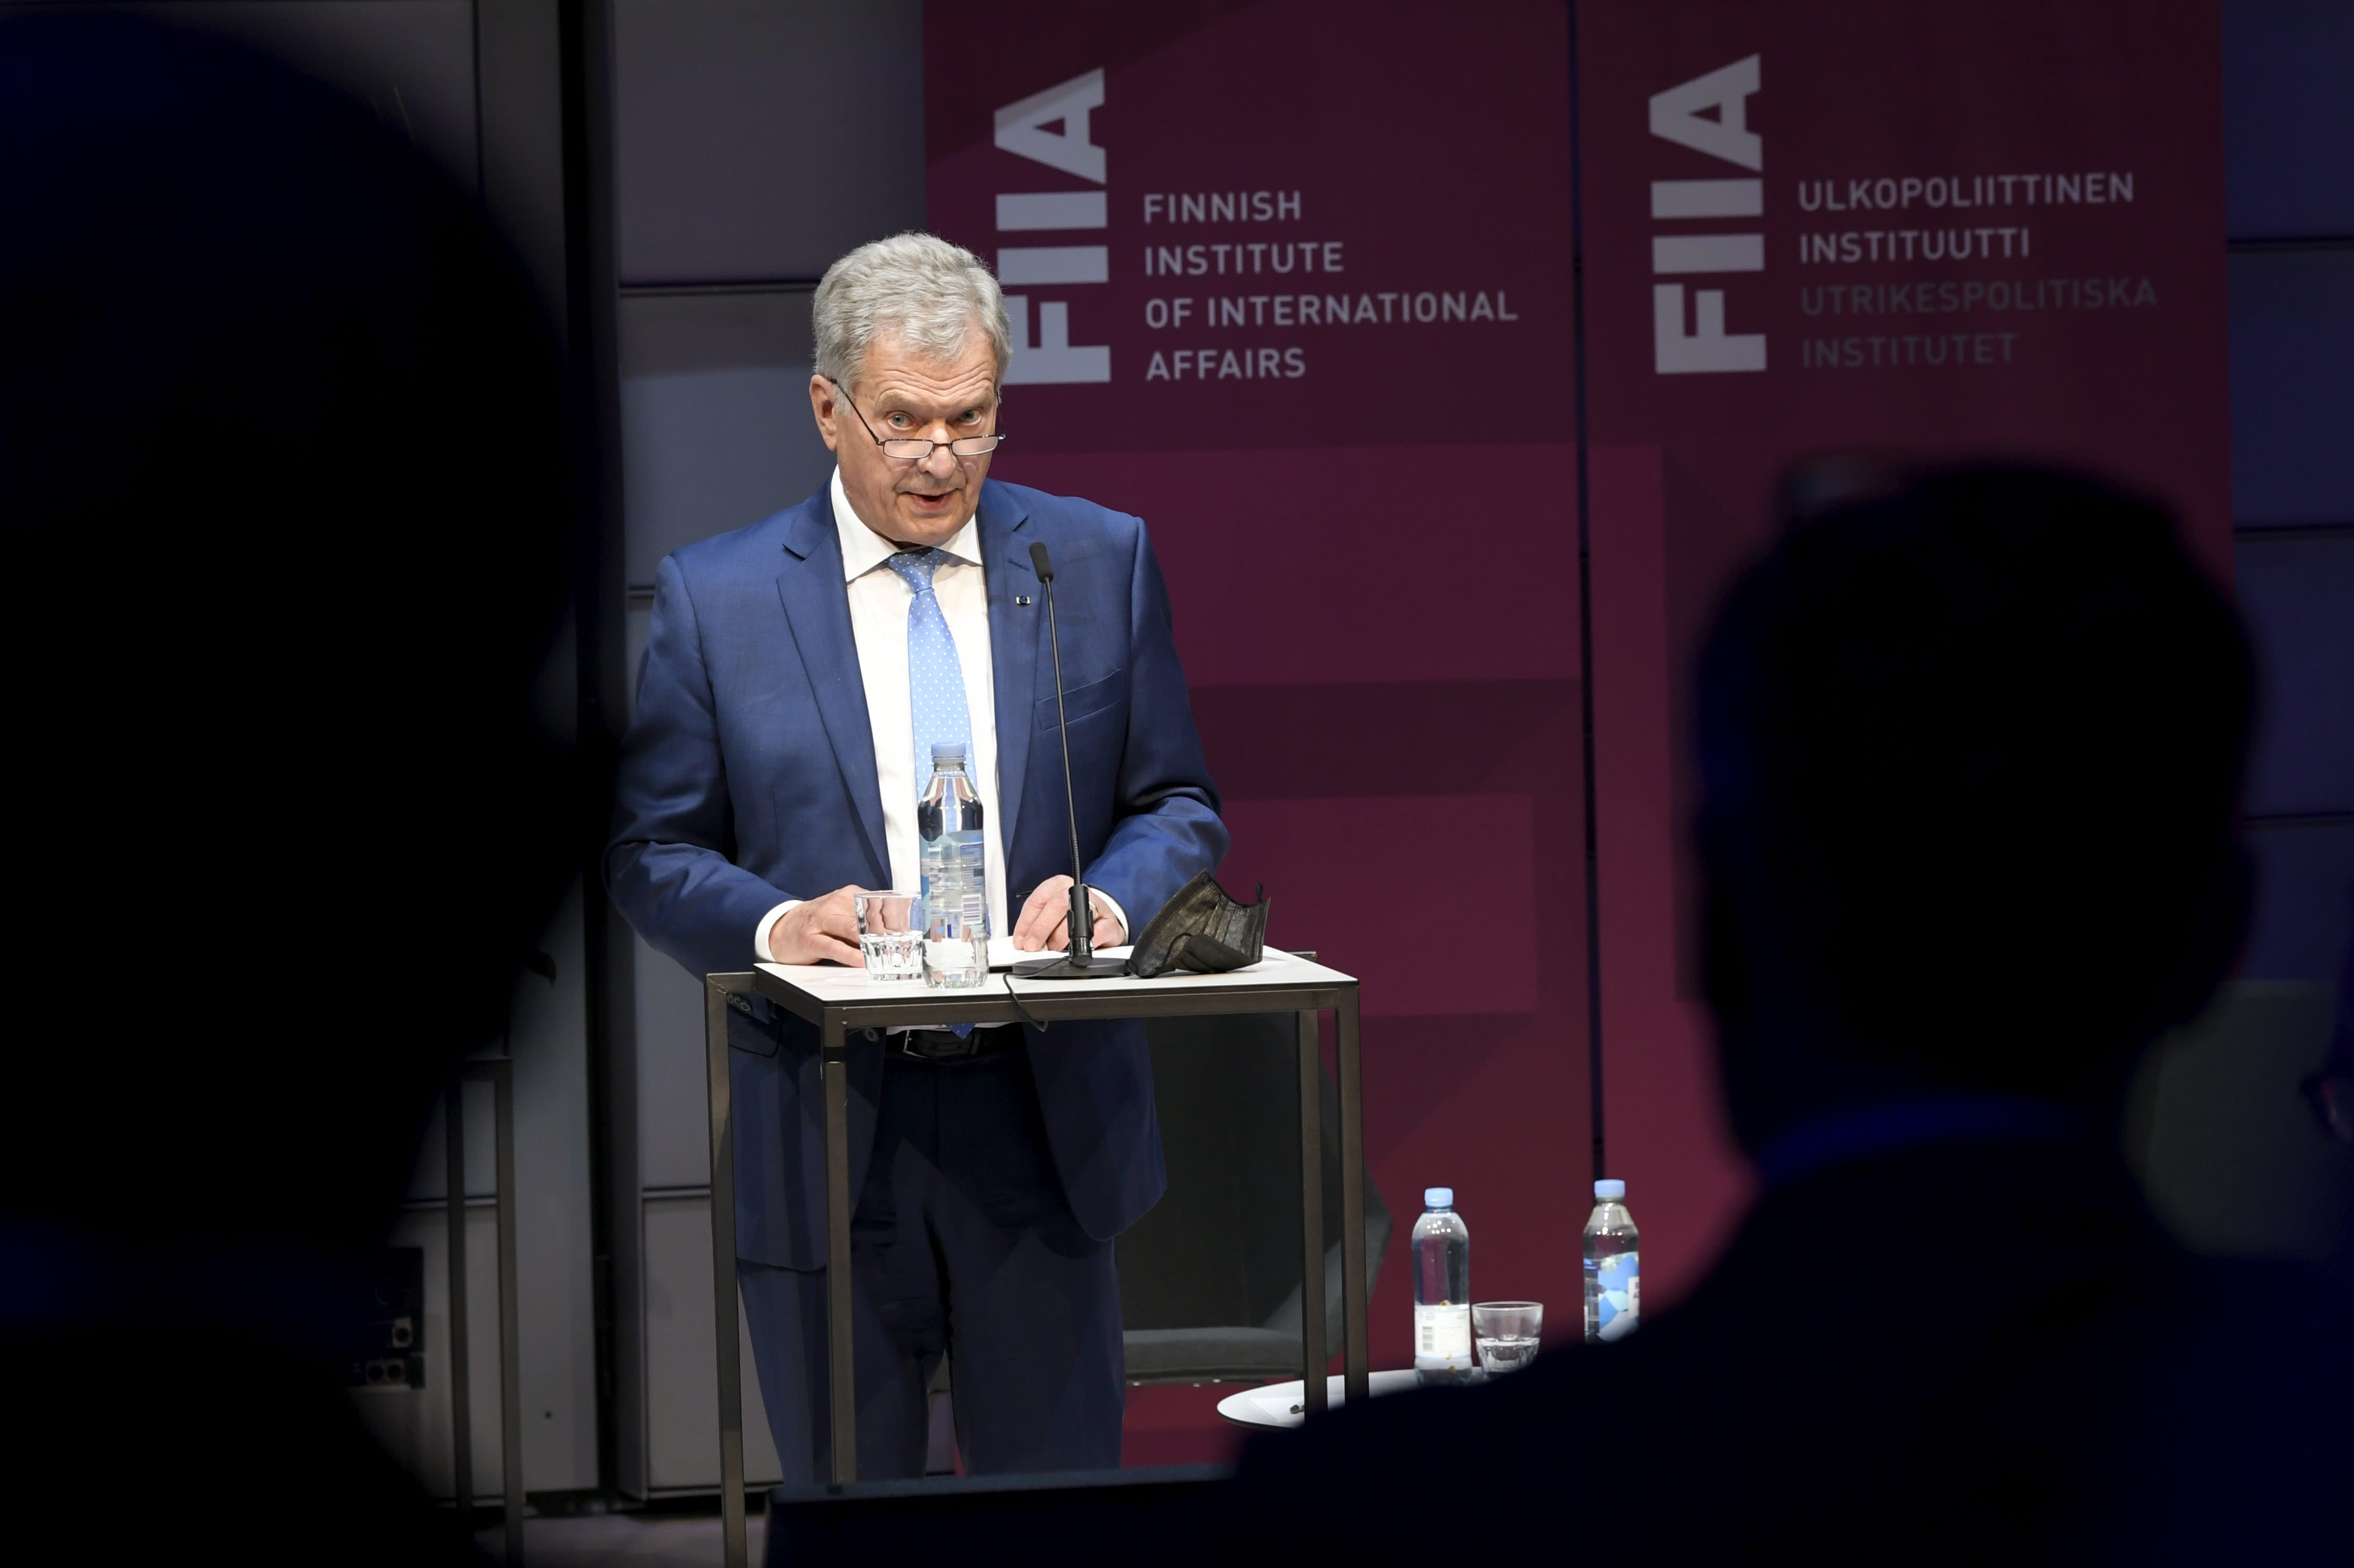 President Niinistö warns Finland of the soft line on security measures